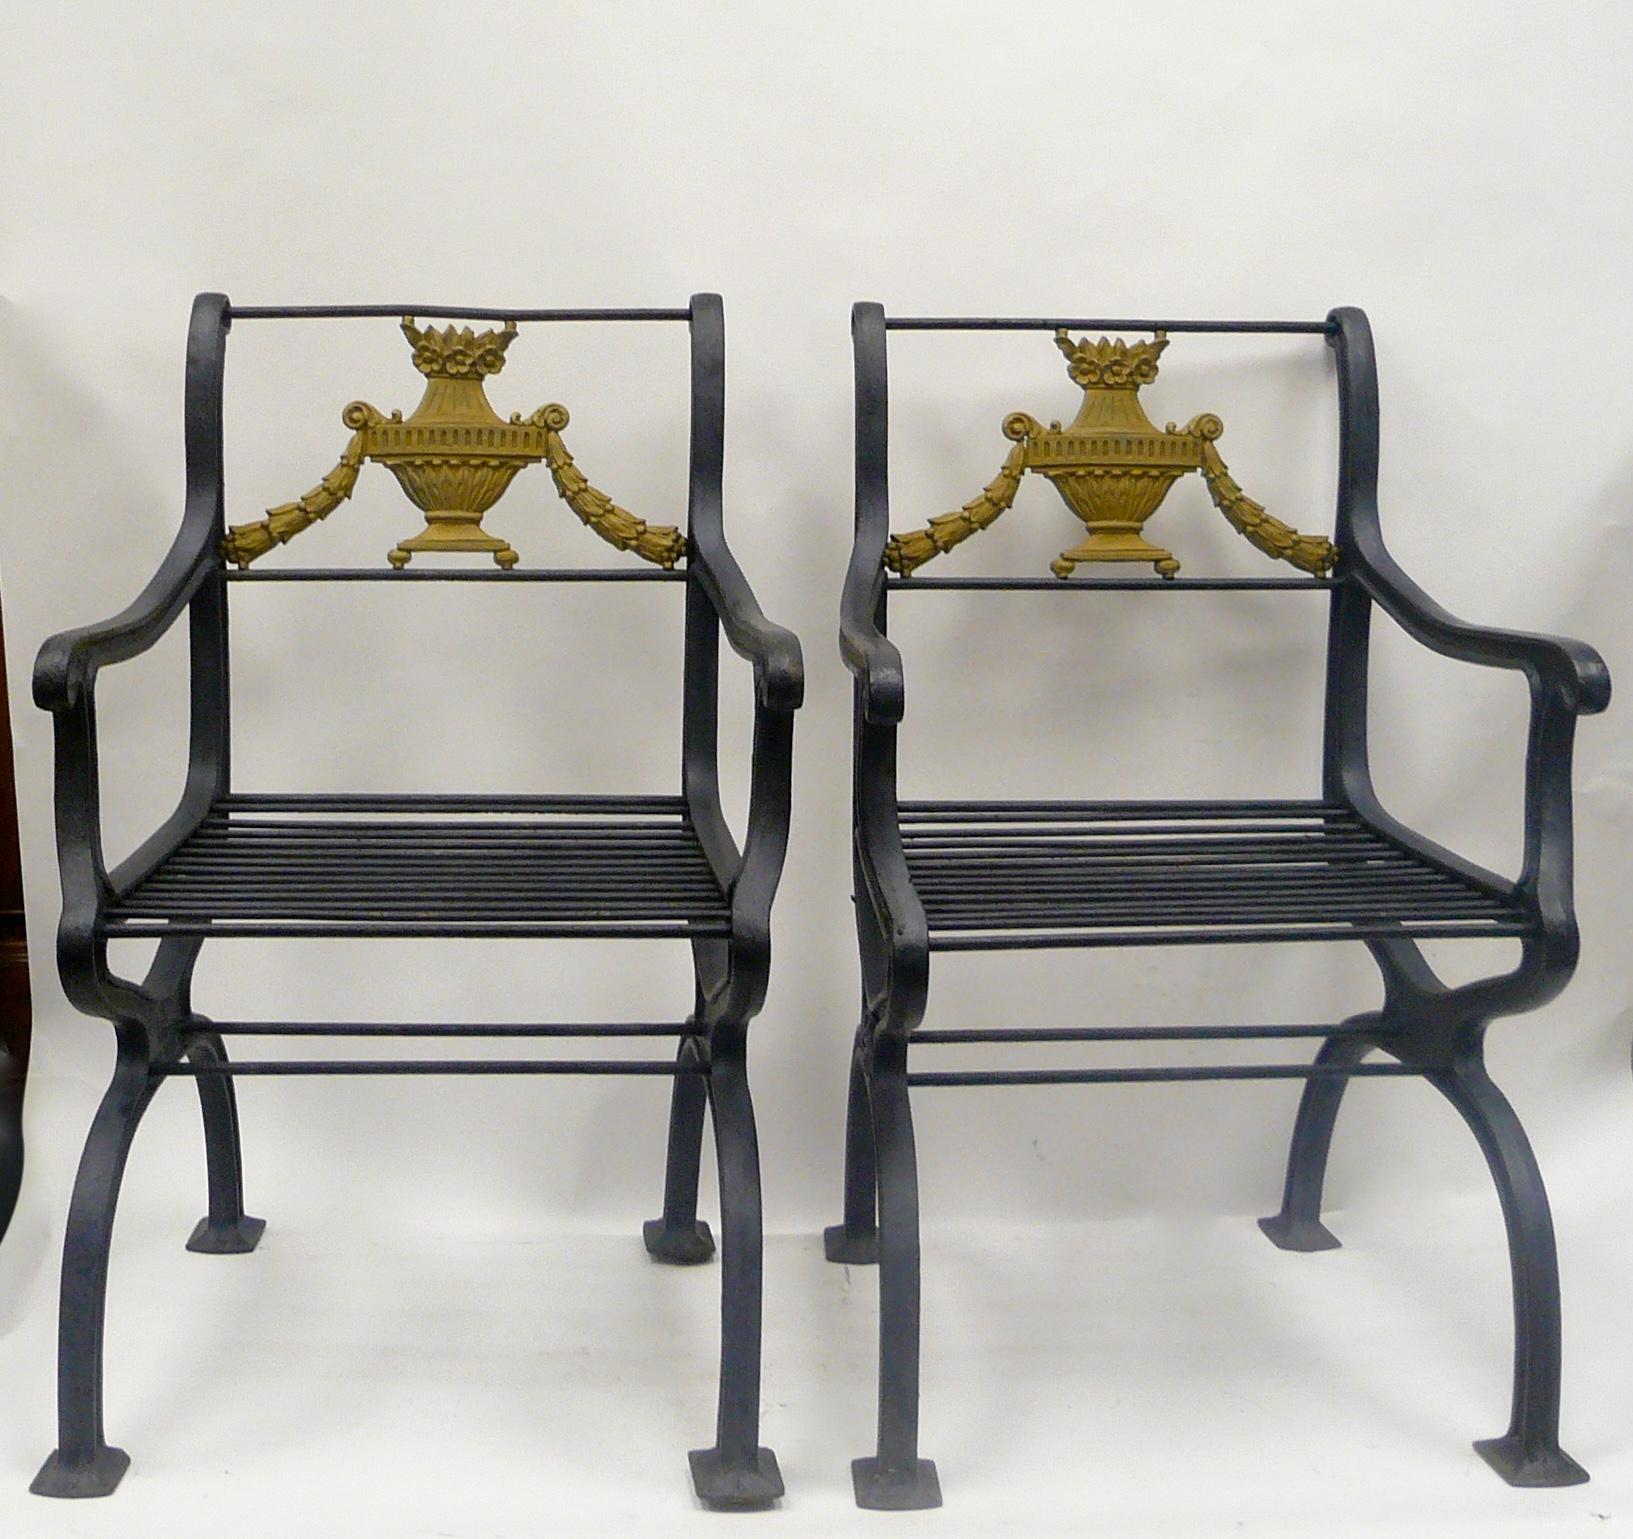 Set of Four Early 20th Century Cast Iron Garden Chairs by W. A. Snow, Boston 1